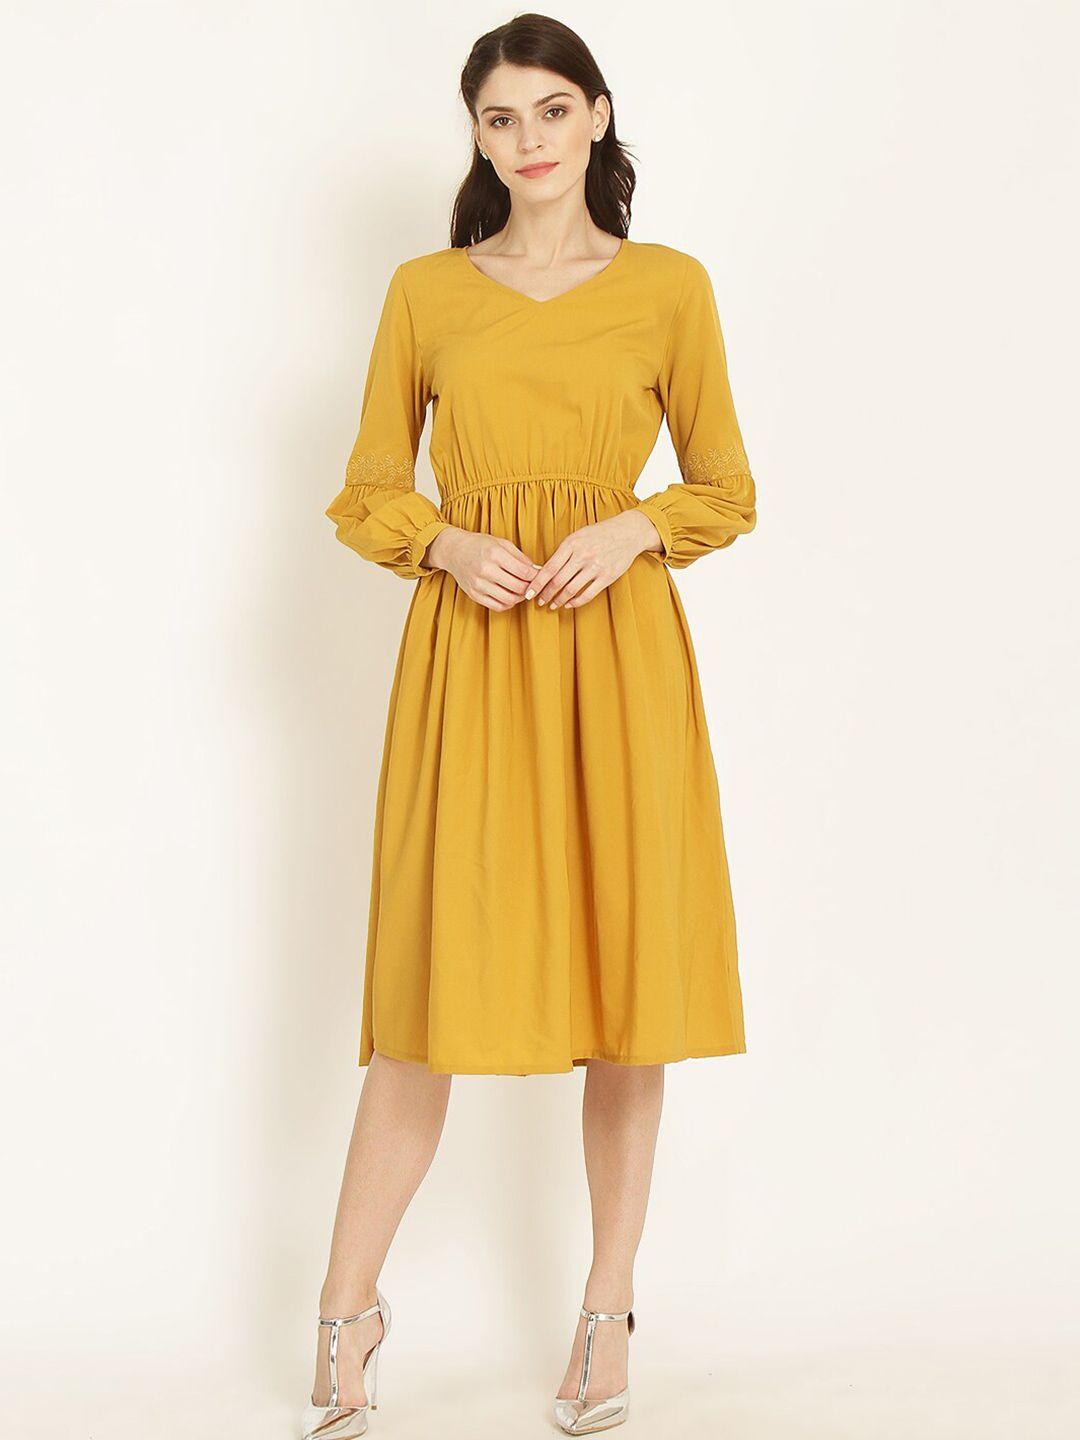 marie claire mustard yellow v-neck crepe fit & flare dress